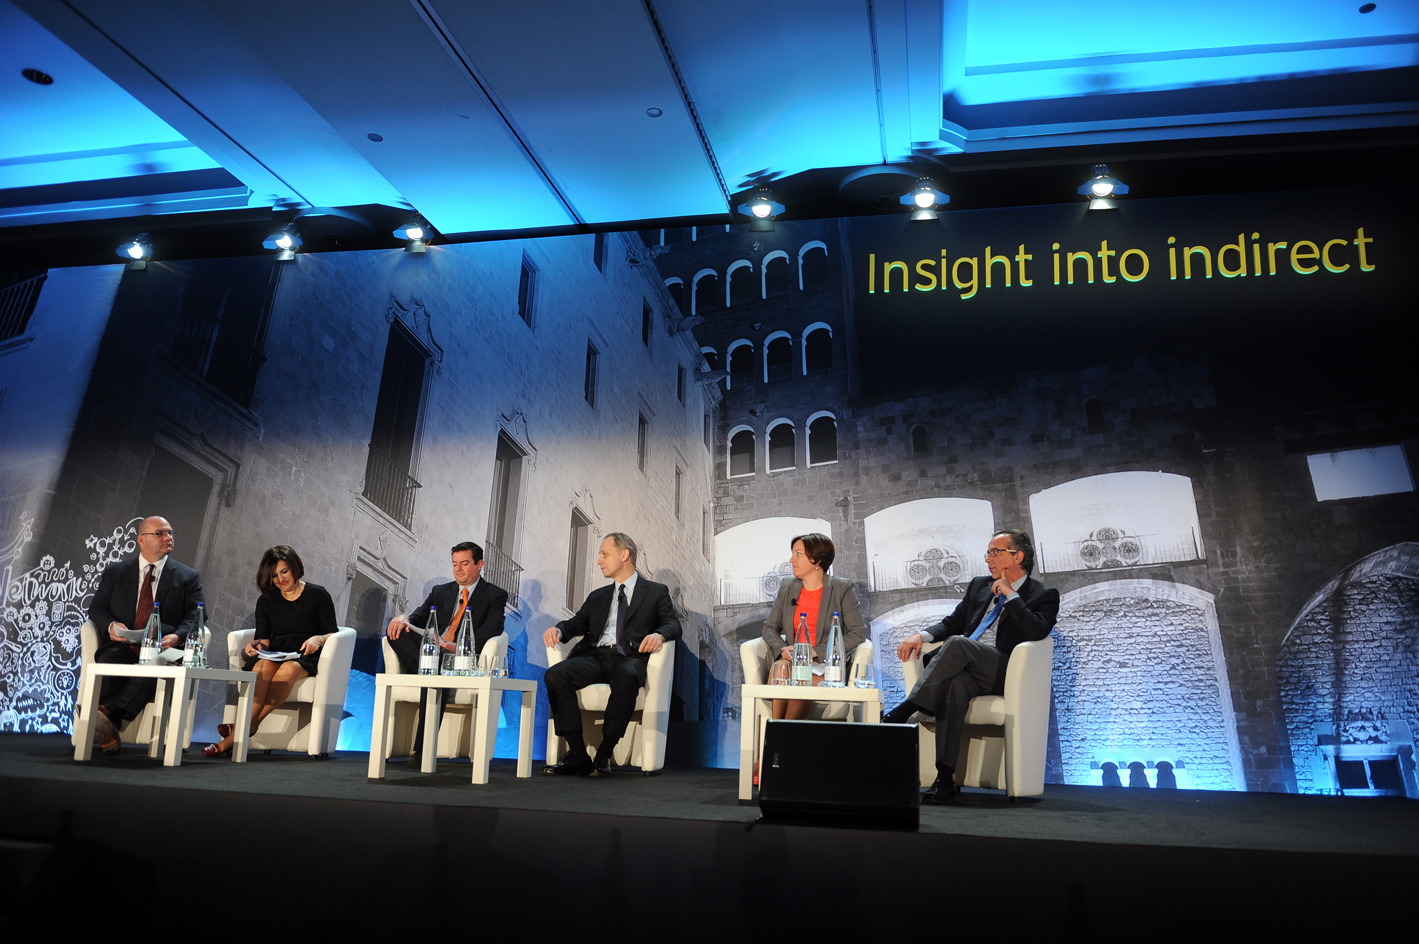 EY 'Insight into indirect' stage set, Barcelona 2015